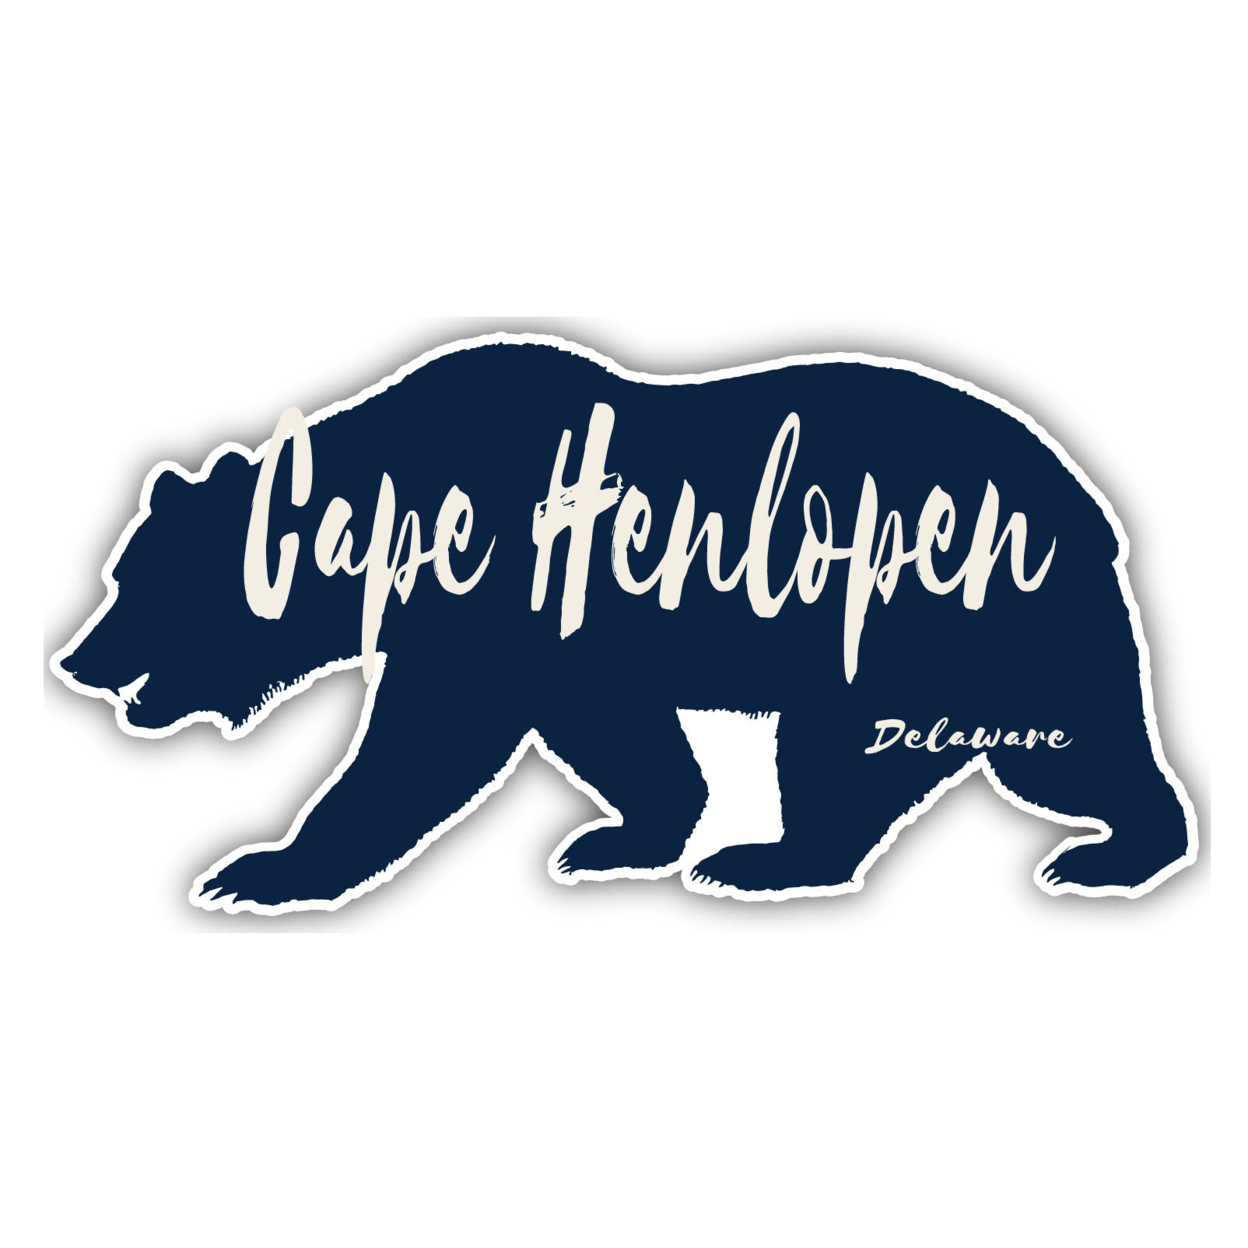 Cape Henlopen Delaware Souvenir Decorative Stickers (Choose Theme And Size) - 4-Pack, 4-Inch, Camp Life